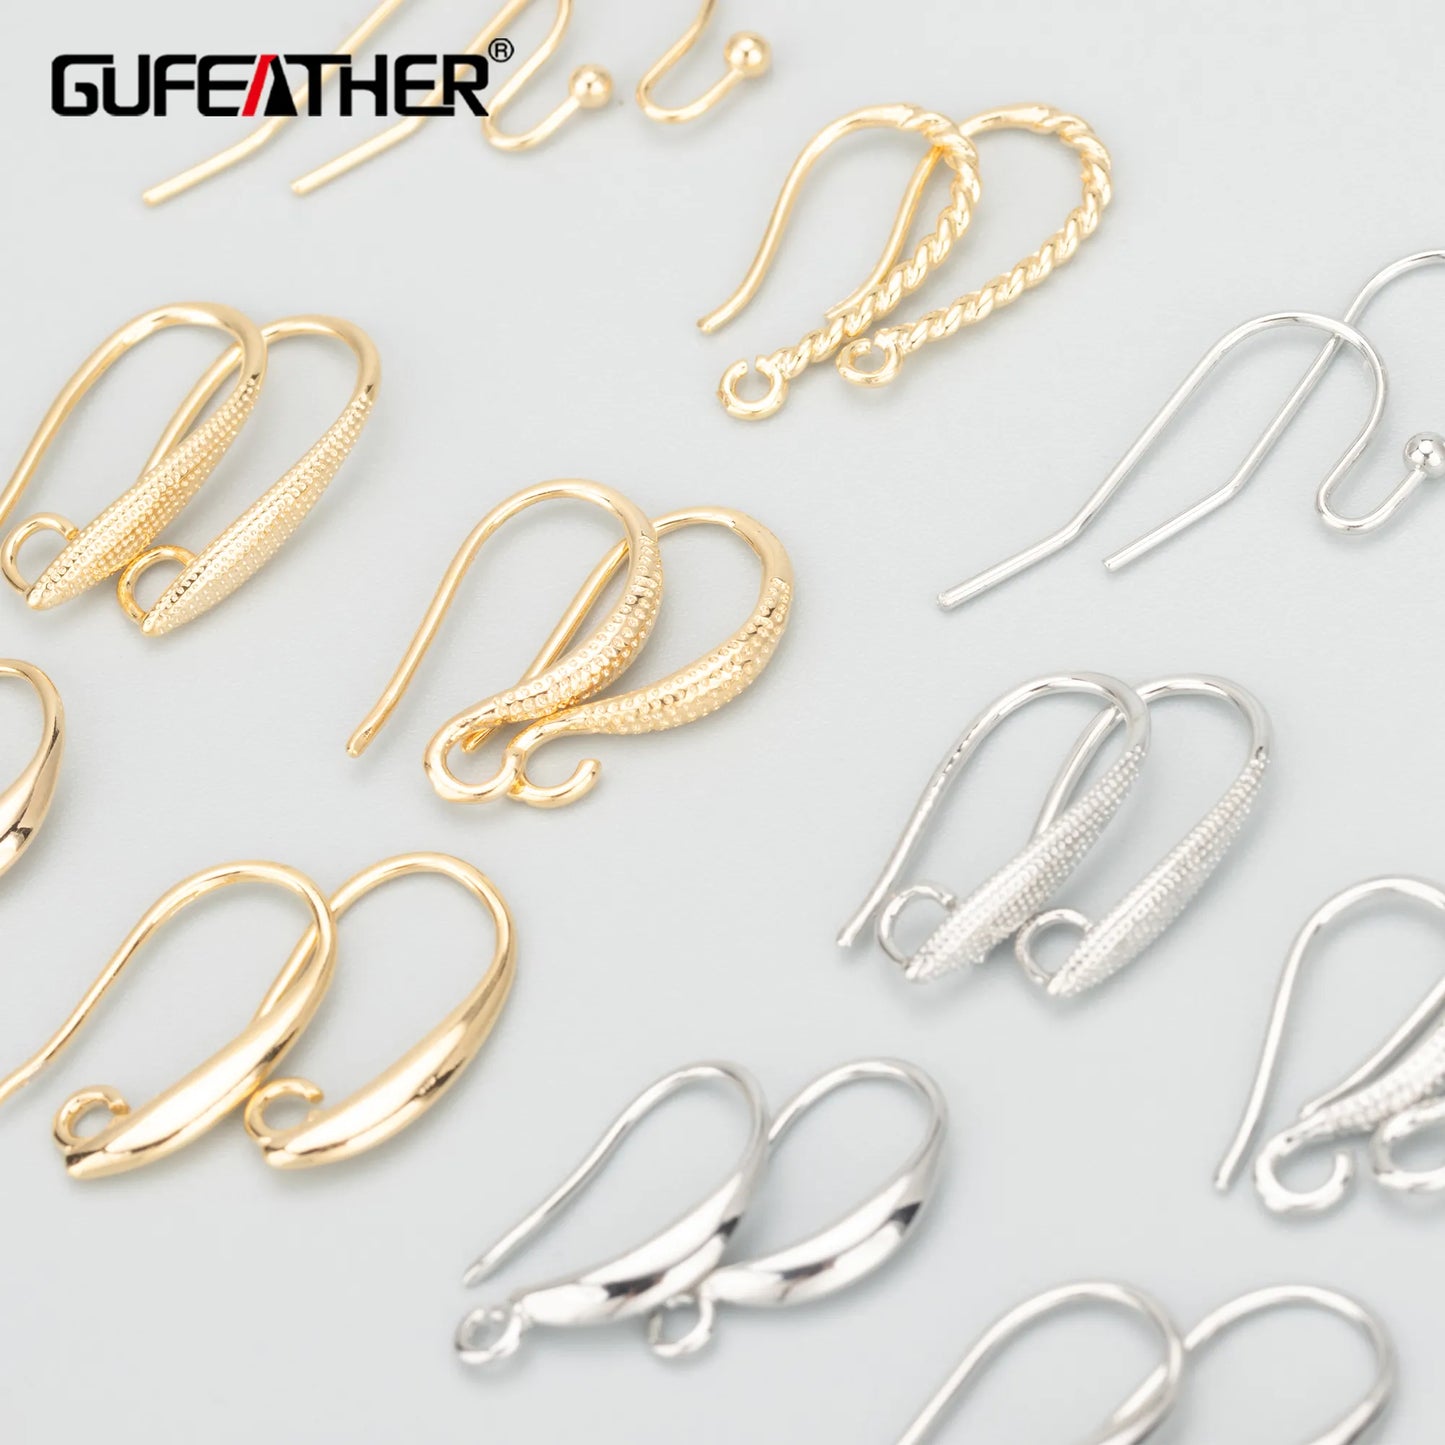 GUFEATHER MB65,jewelry accessories,hooks,nickel free,18k gold rhodium plated,copper,charms,diy earrings,jewelry making,50pcs/lot